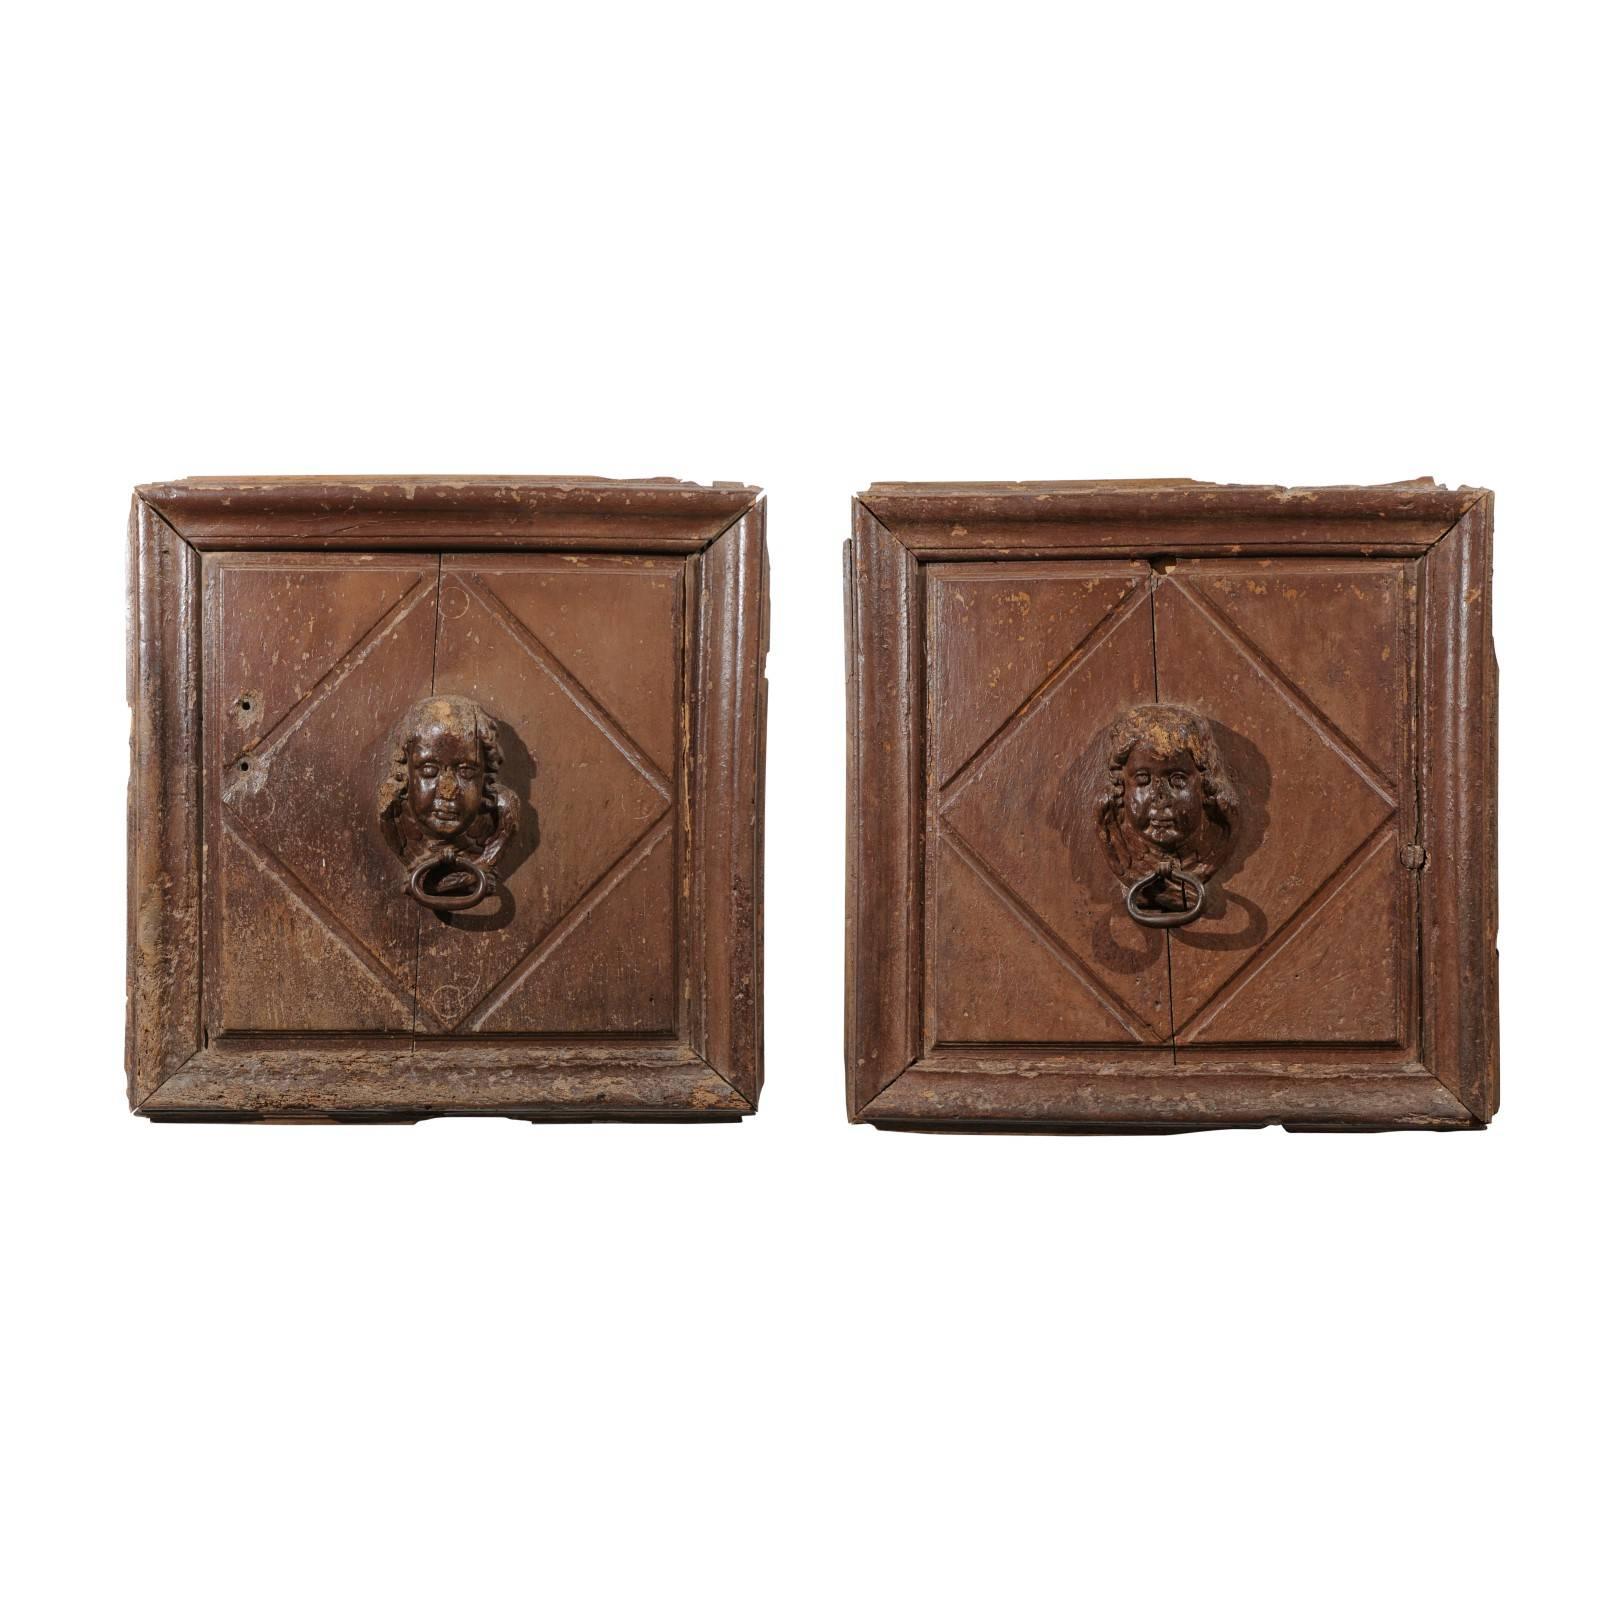 Pair of French 17th Century Wooden Panels with High-Relief Carved Cherubs